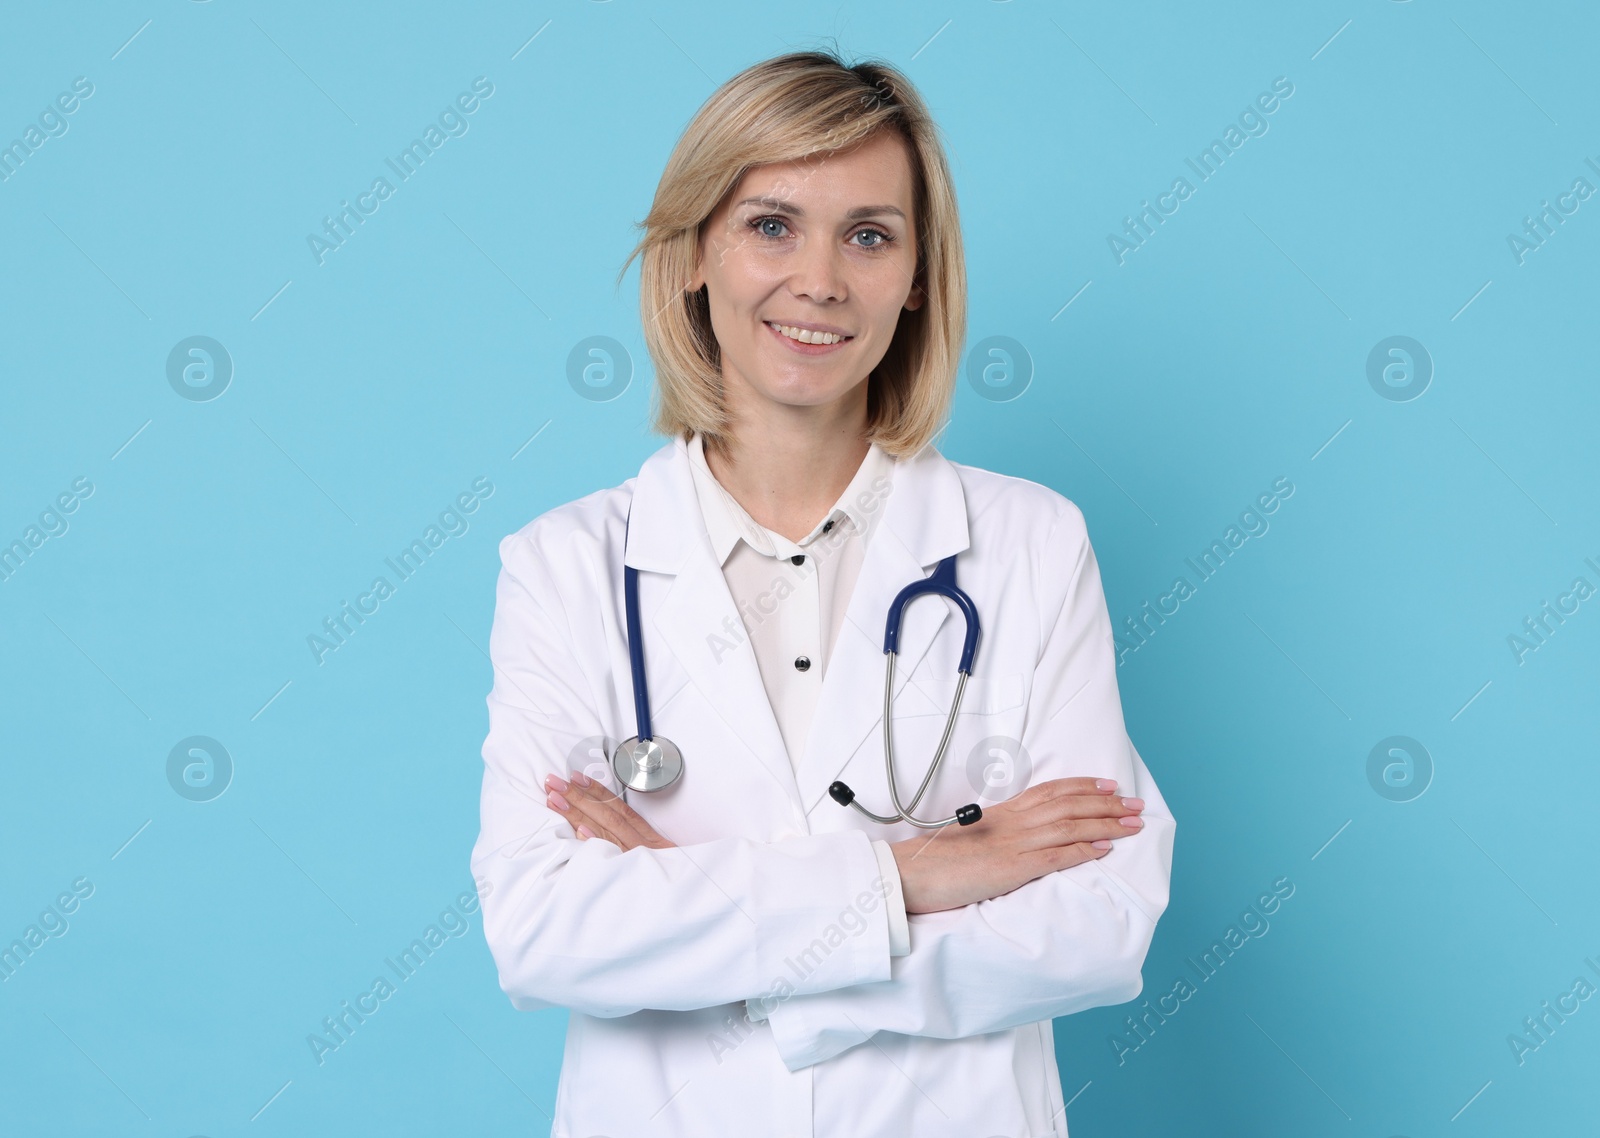 Photo of Smiling doctor with crossed arms on light blue background